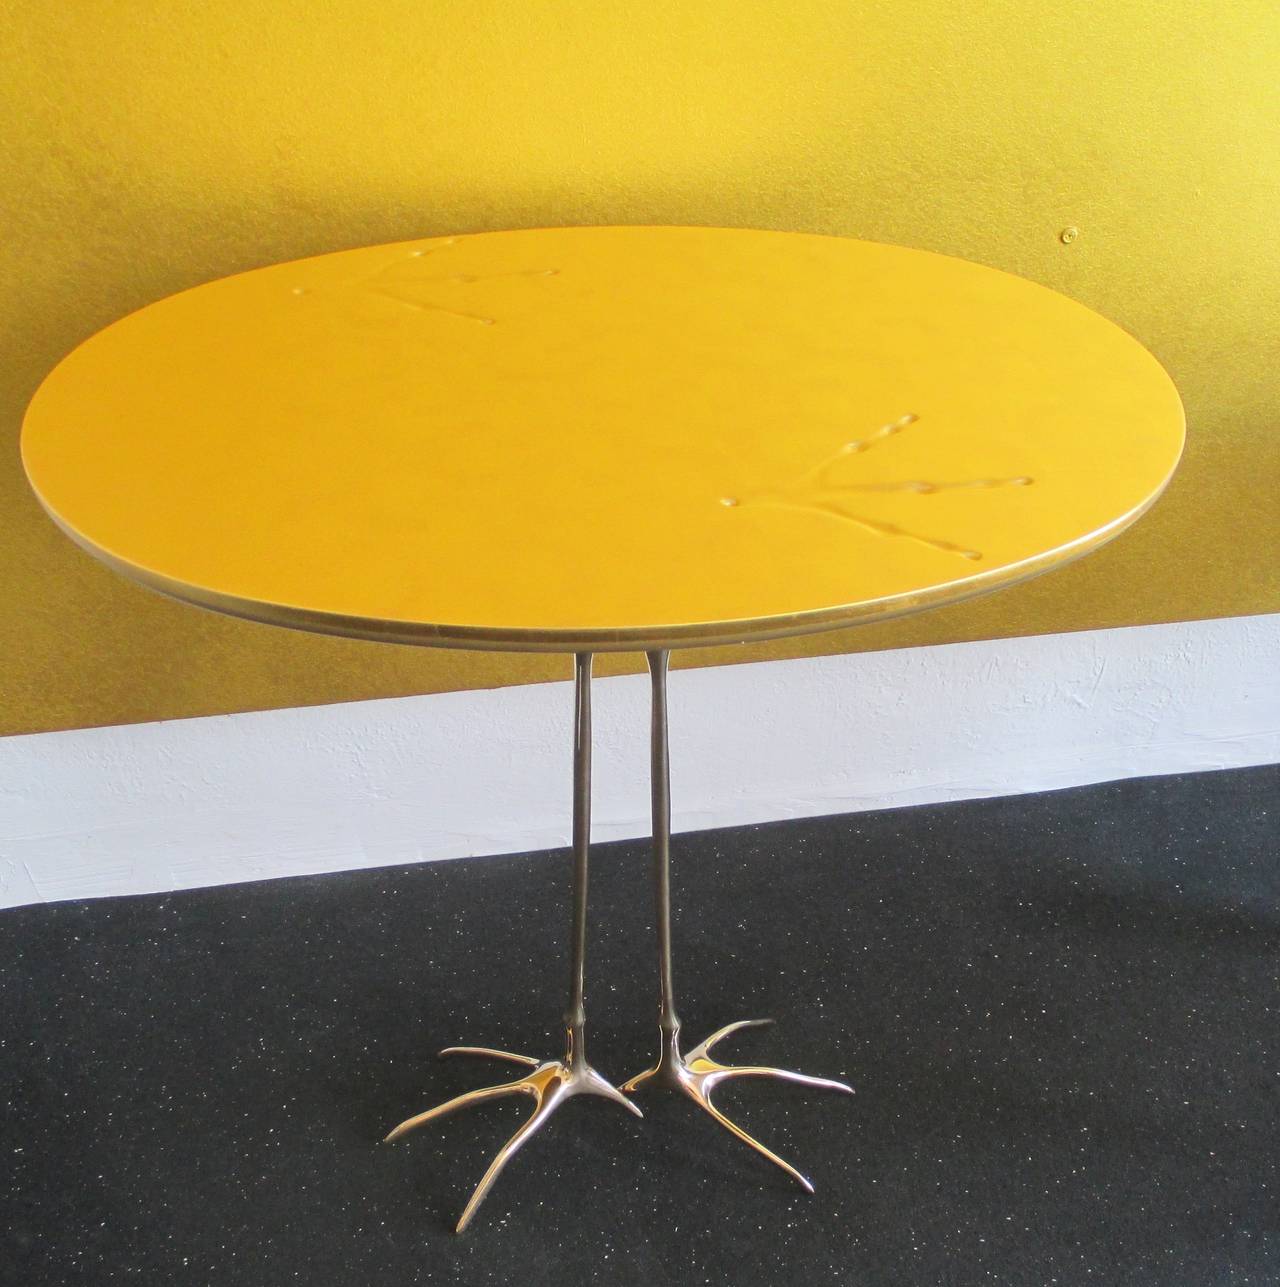 Small TABLE GOLD LEAFED W/BRASS LEGS by Meret Oppenheim.